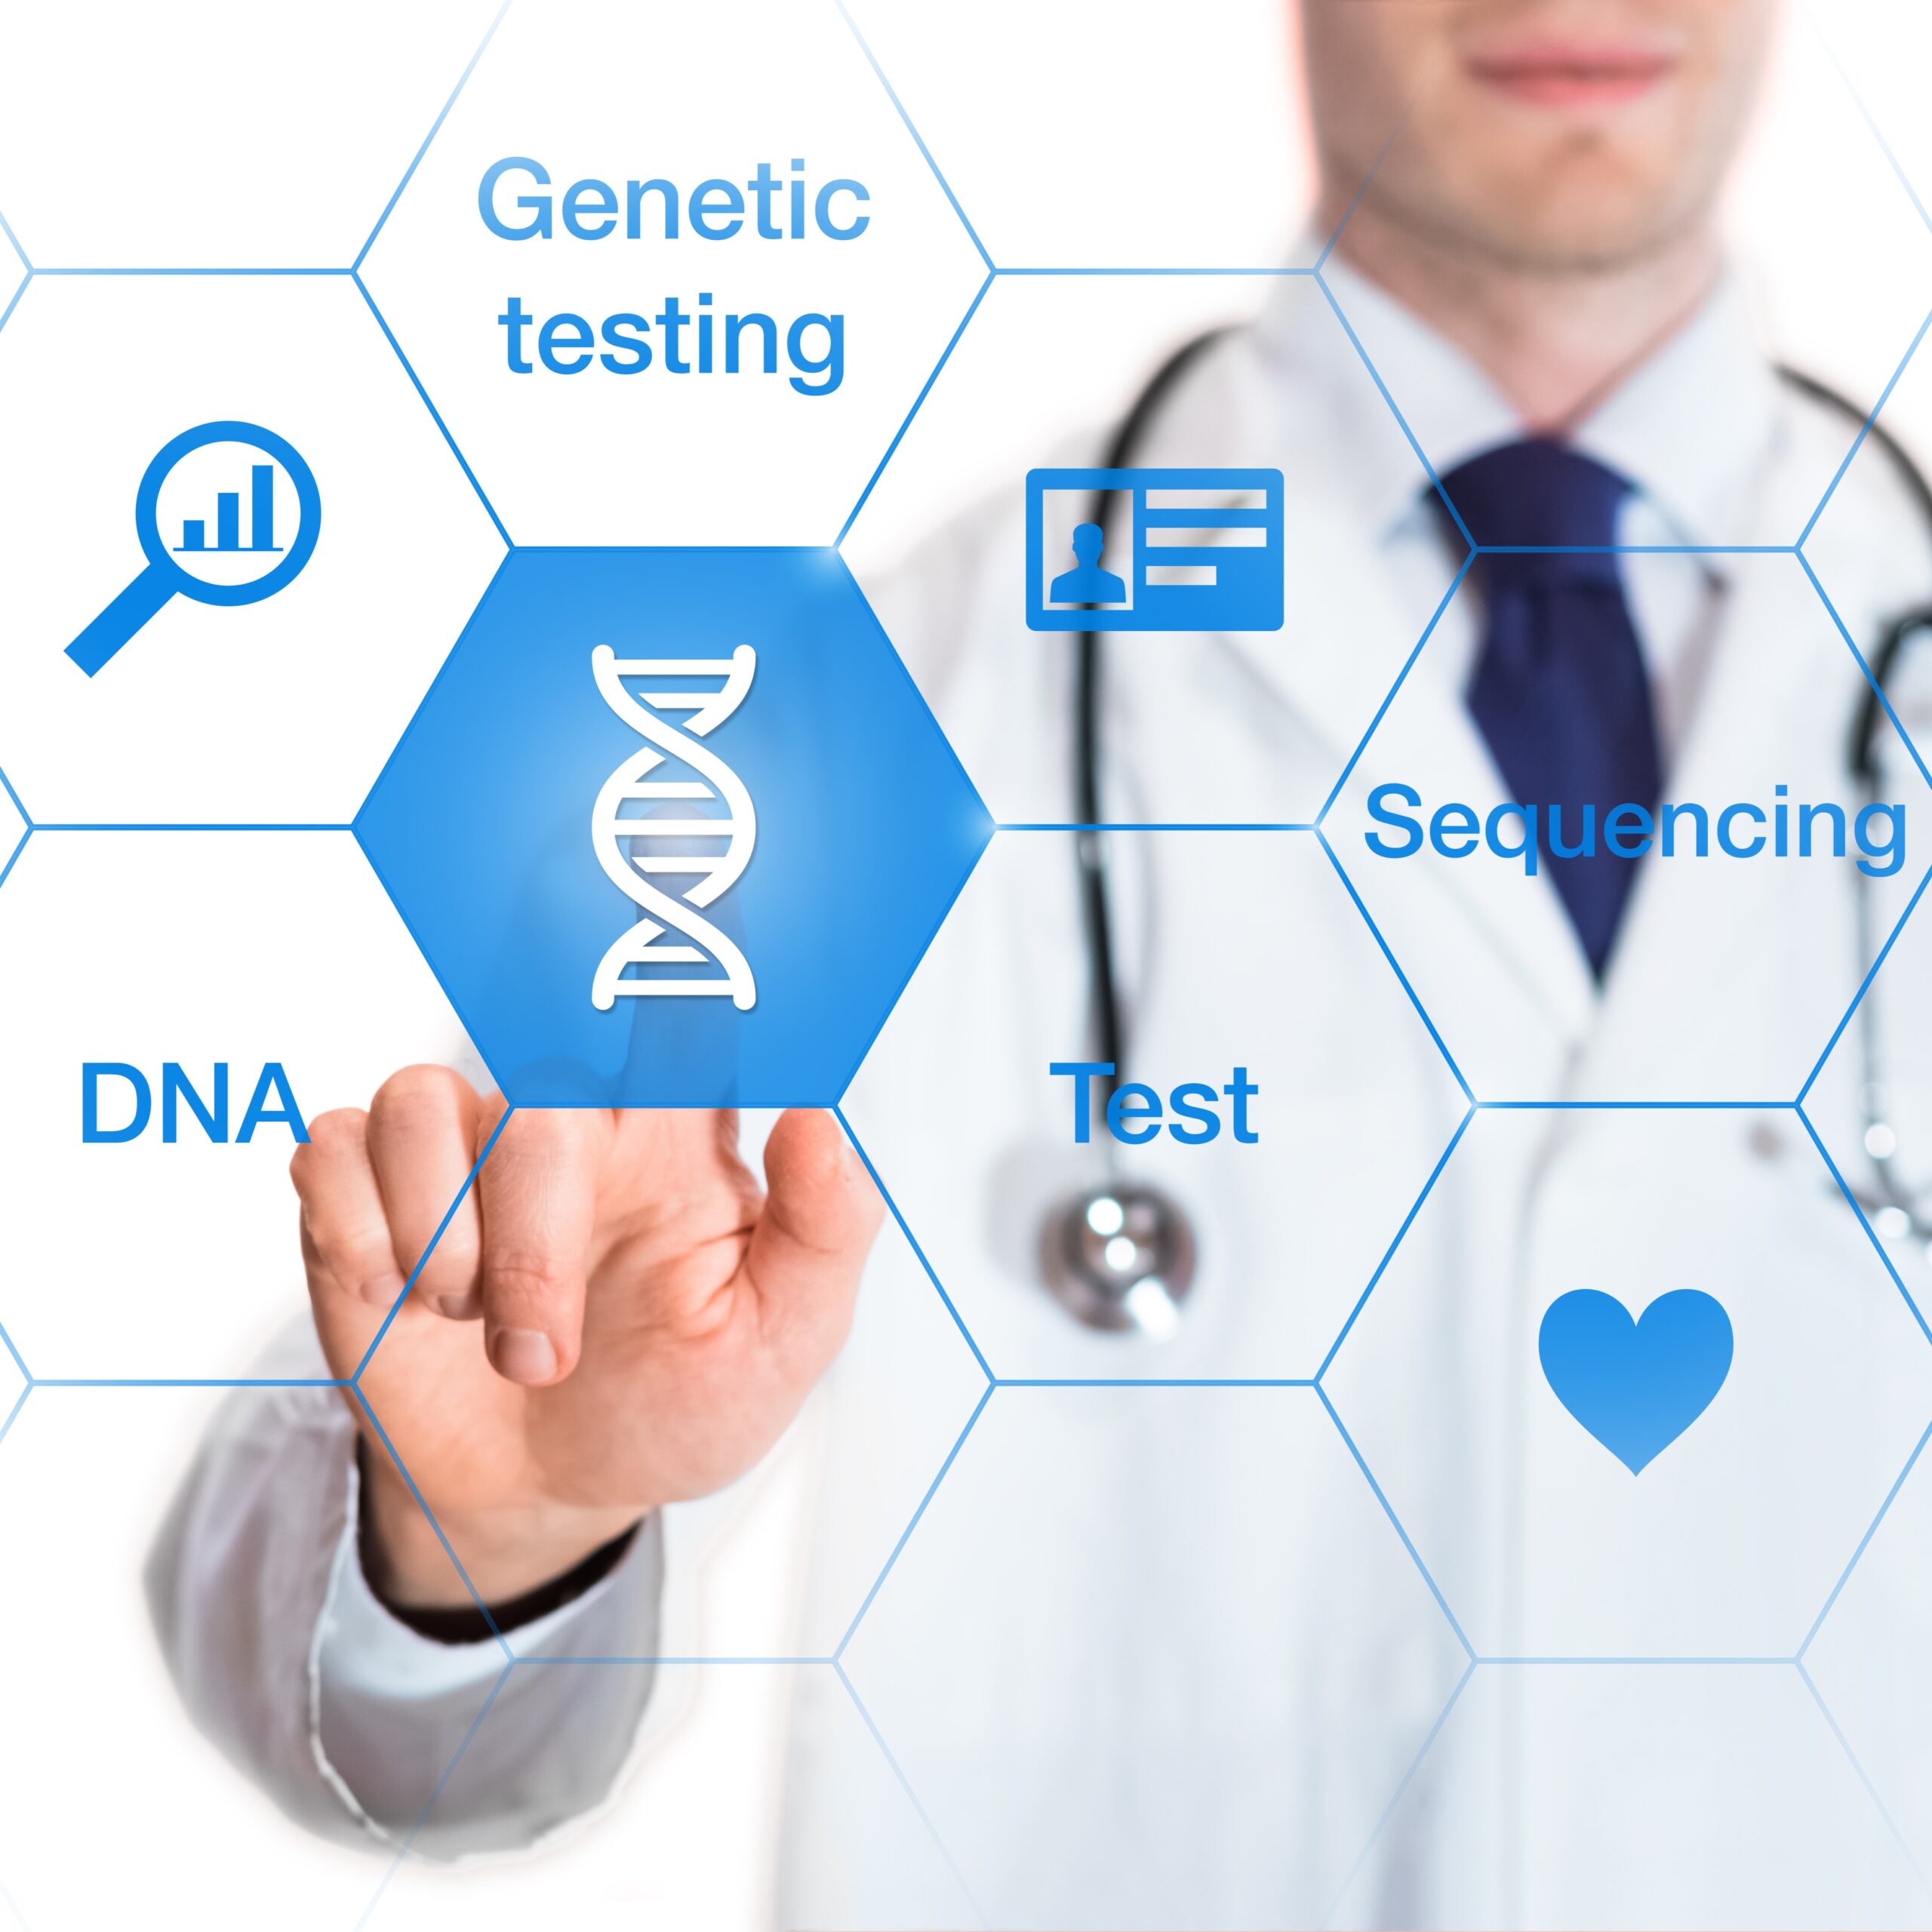 What is the difference between genetic and genomic testing?